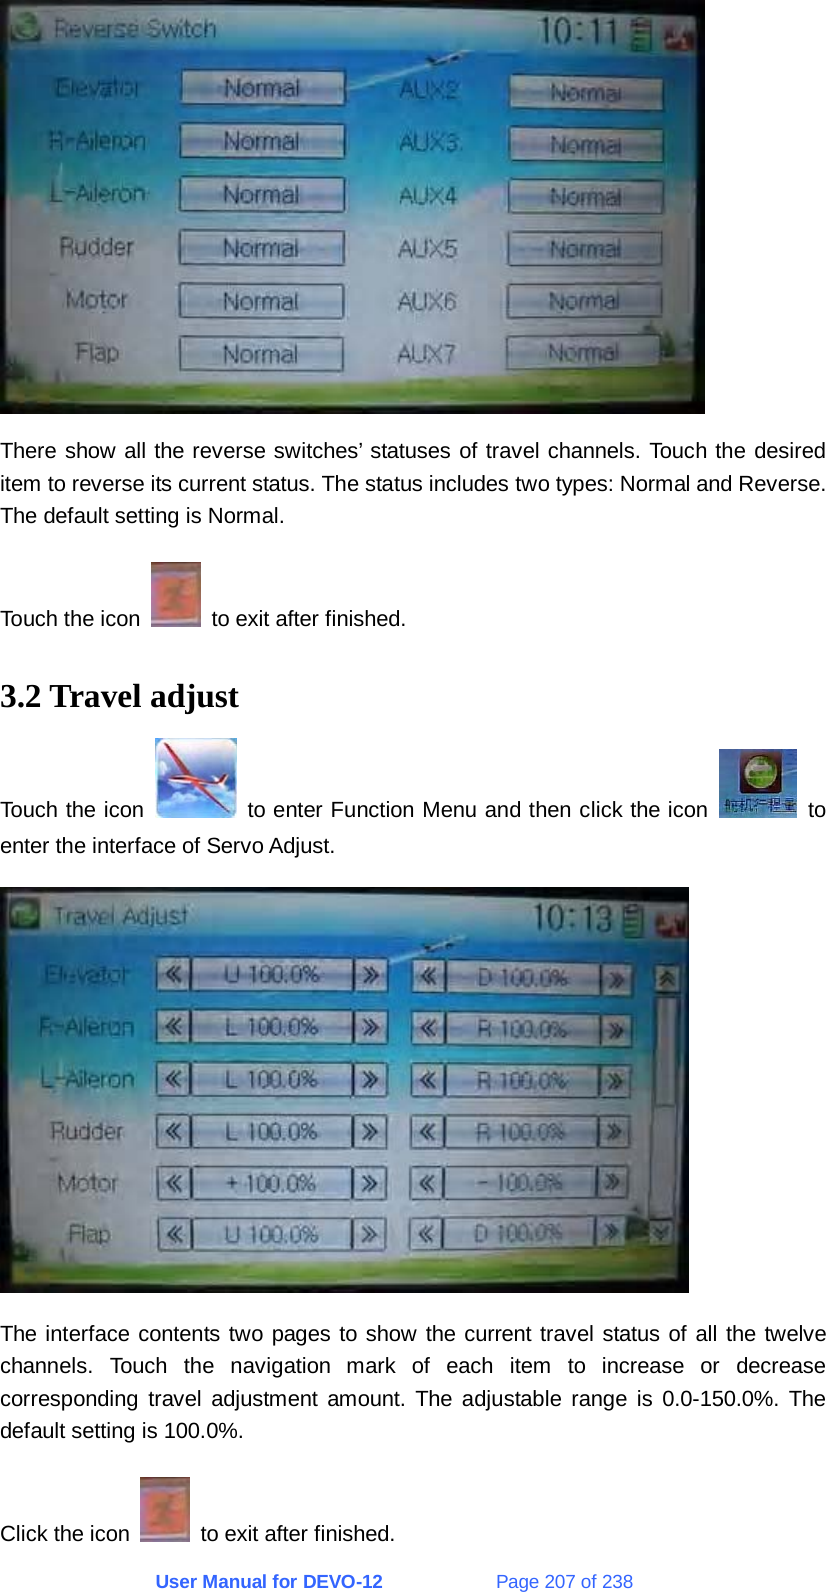 User Manual for DEVO-12             Page 207 of 238  There show all the reverse switches’ statuses of travel channels. Touch the desired item to reverse its current status. The status includes two types: Normal and Reverse. The default setting is Normal. Touch the icon    to exit after finished. 3.2 Travel adjust Touch the icon   to enter Function Menu and then click the icon   to enter the interface of Servo Adjust.  The interface contents two pages to show the current travel status of all the twelve channels. Touch the navigation mark of each item to increase or decrease corresponding travel adjustment amount. The adjustable range is 0.0-150.0%. The default setting is 100.0%. Click the icon    to exit after finished. 